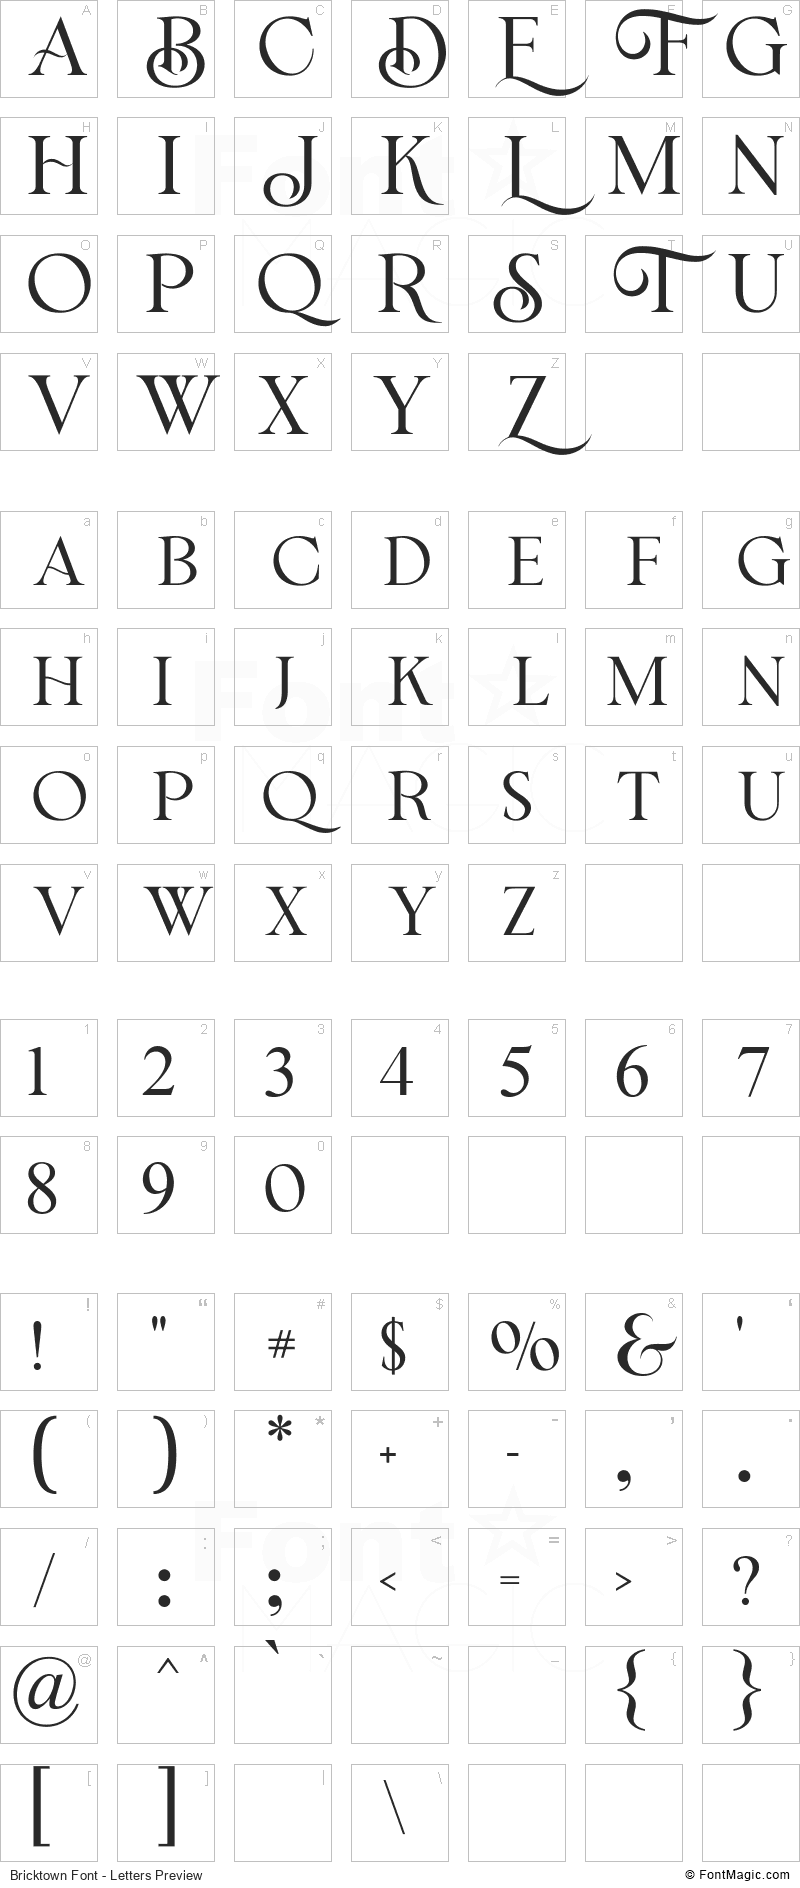 Bricktown Font - All Latters Preview Chart